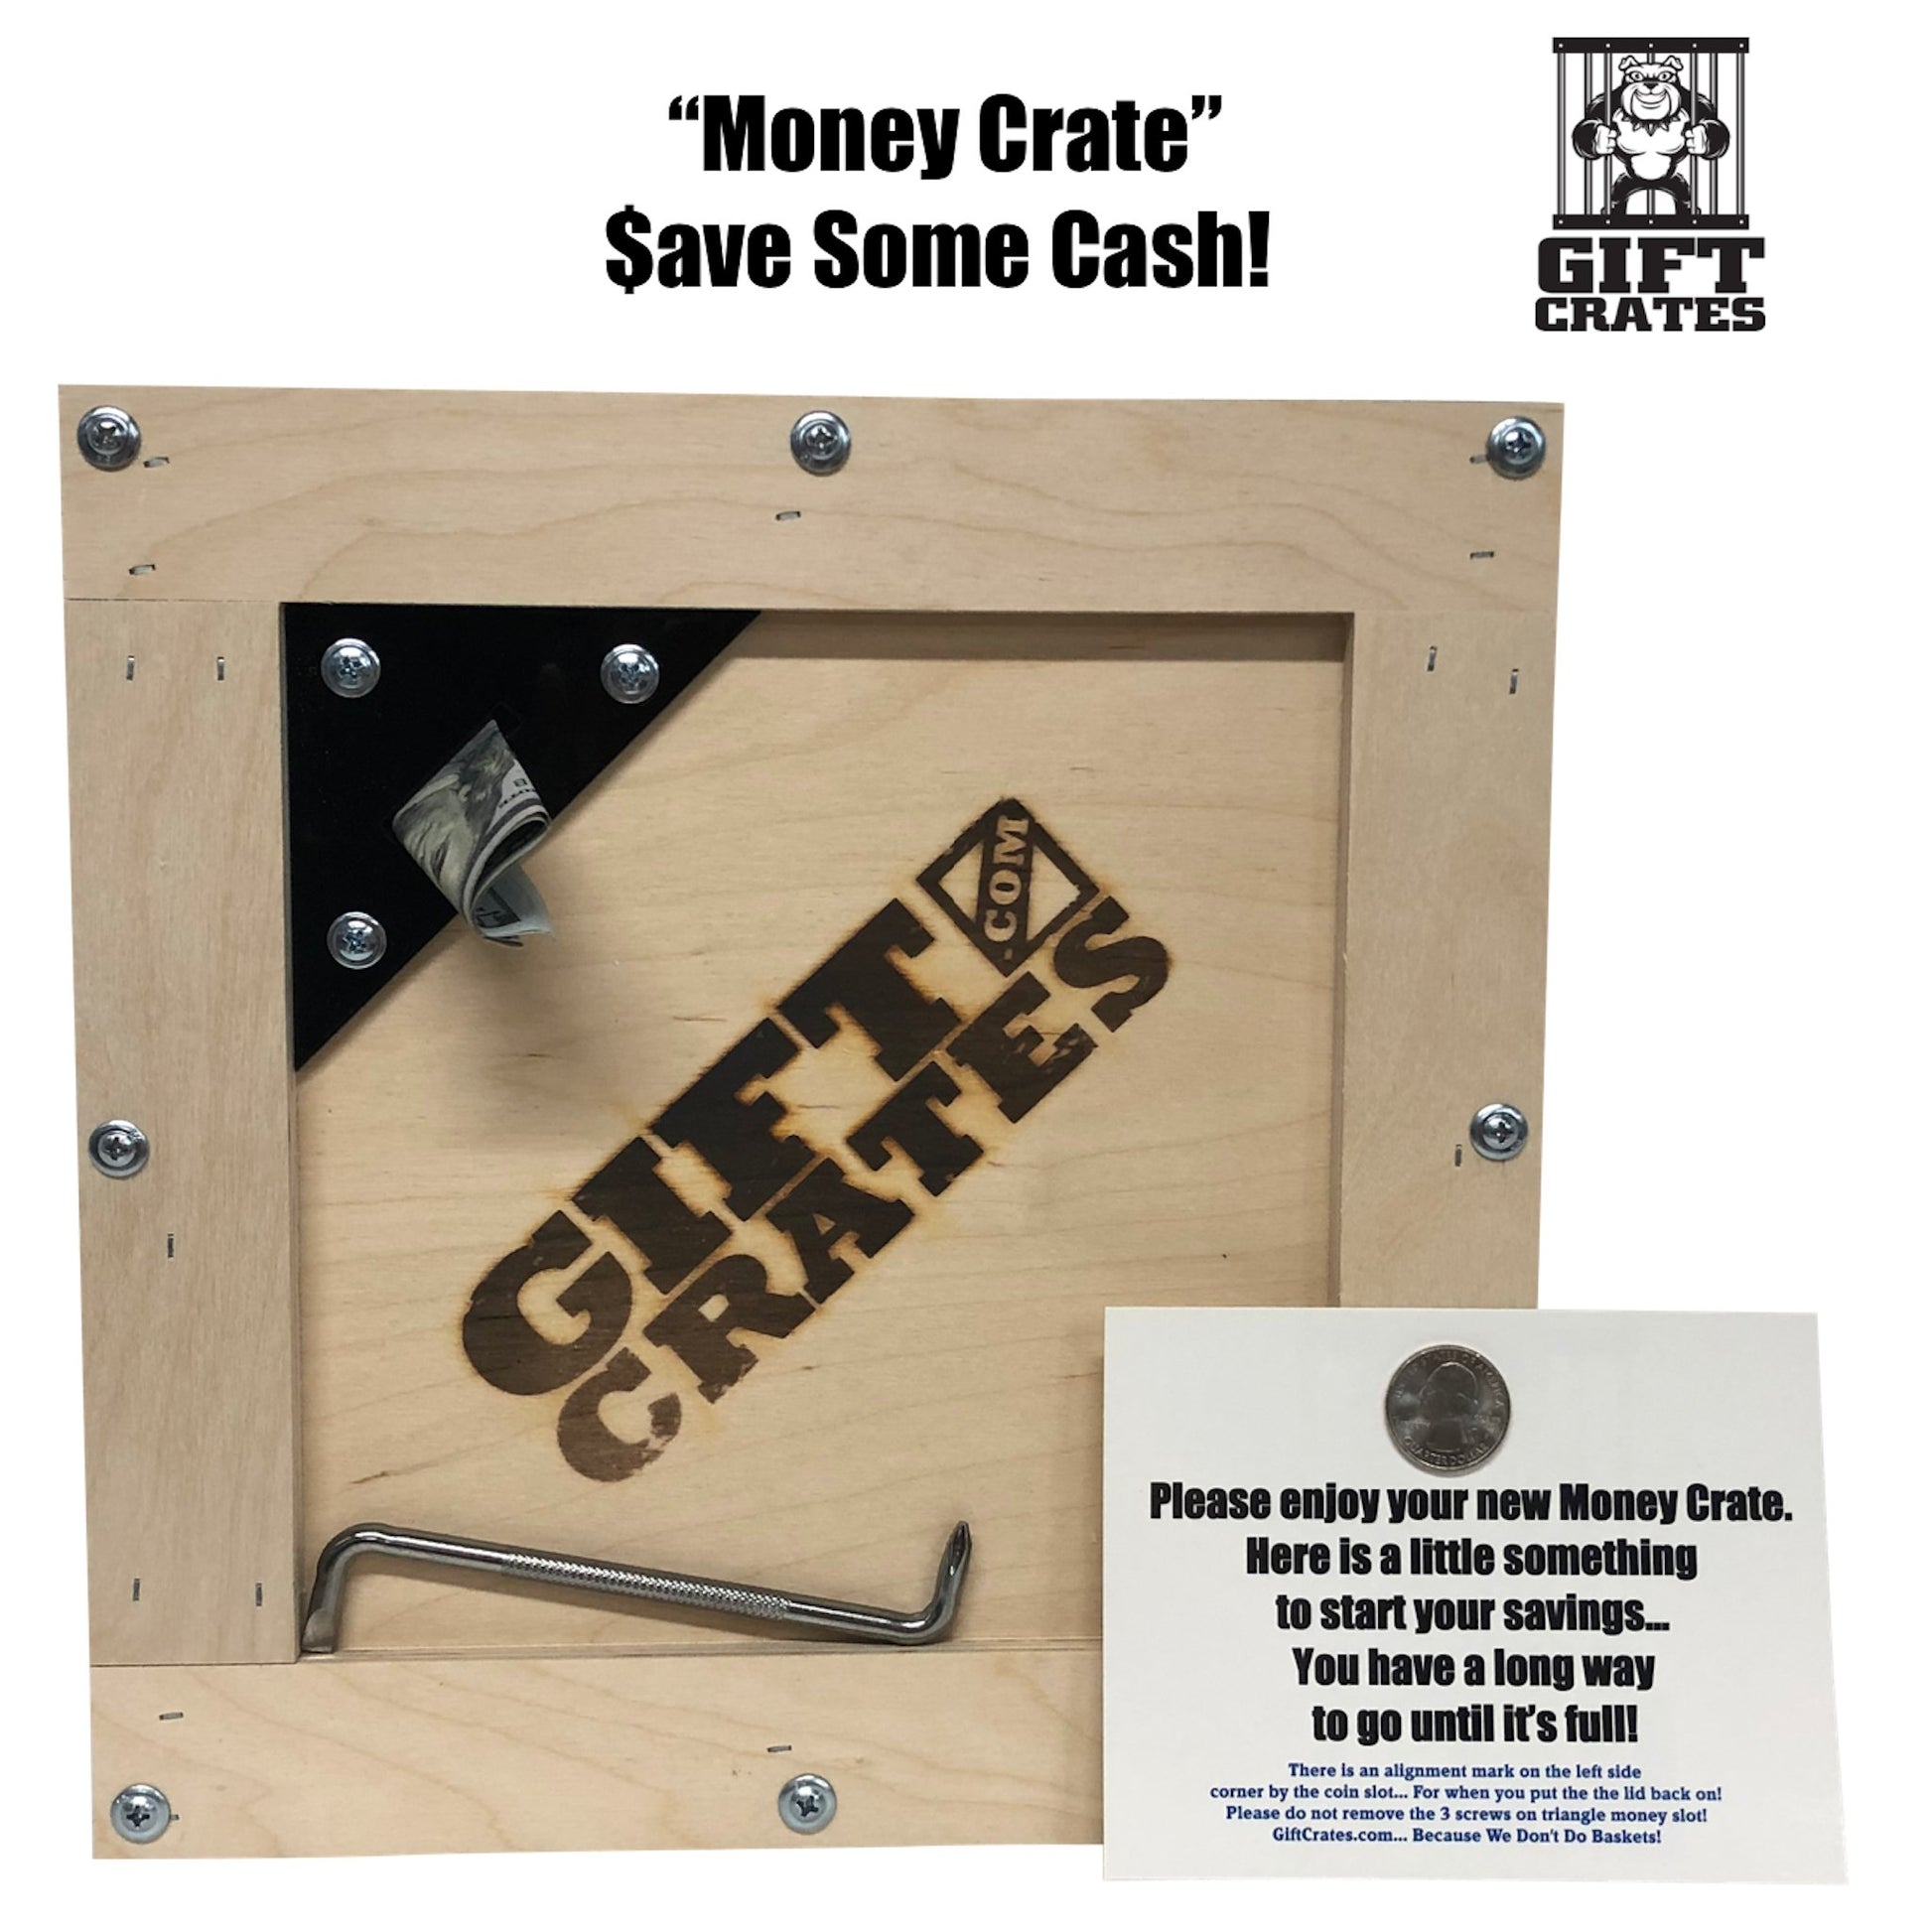 Car Wash Crate - Gift Crates